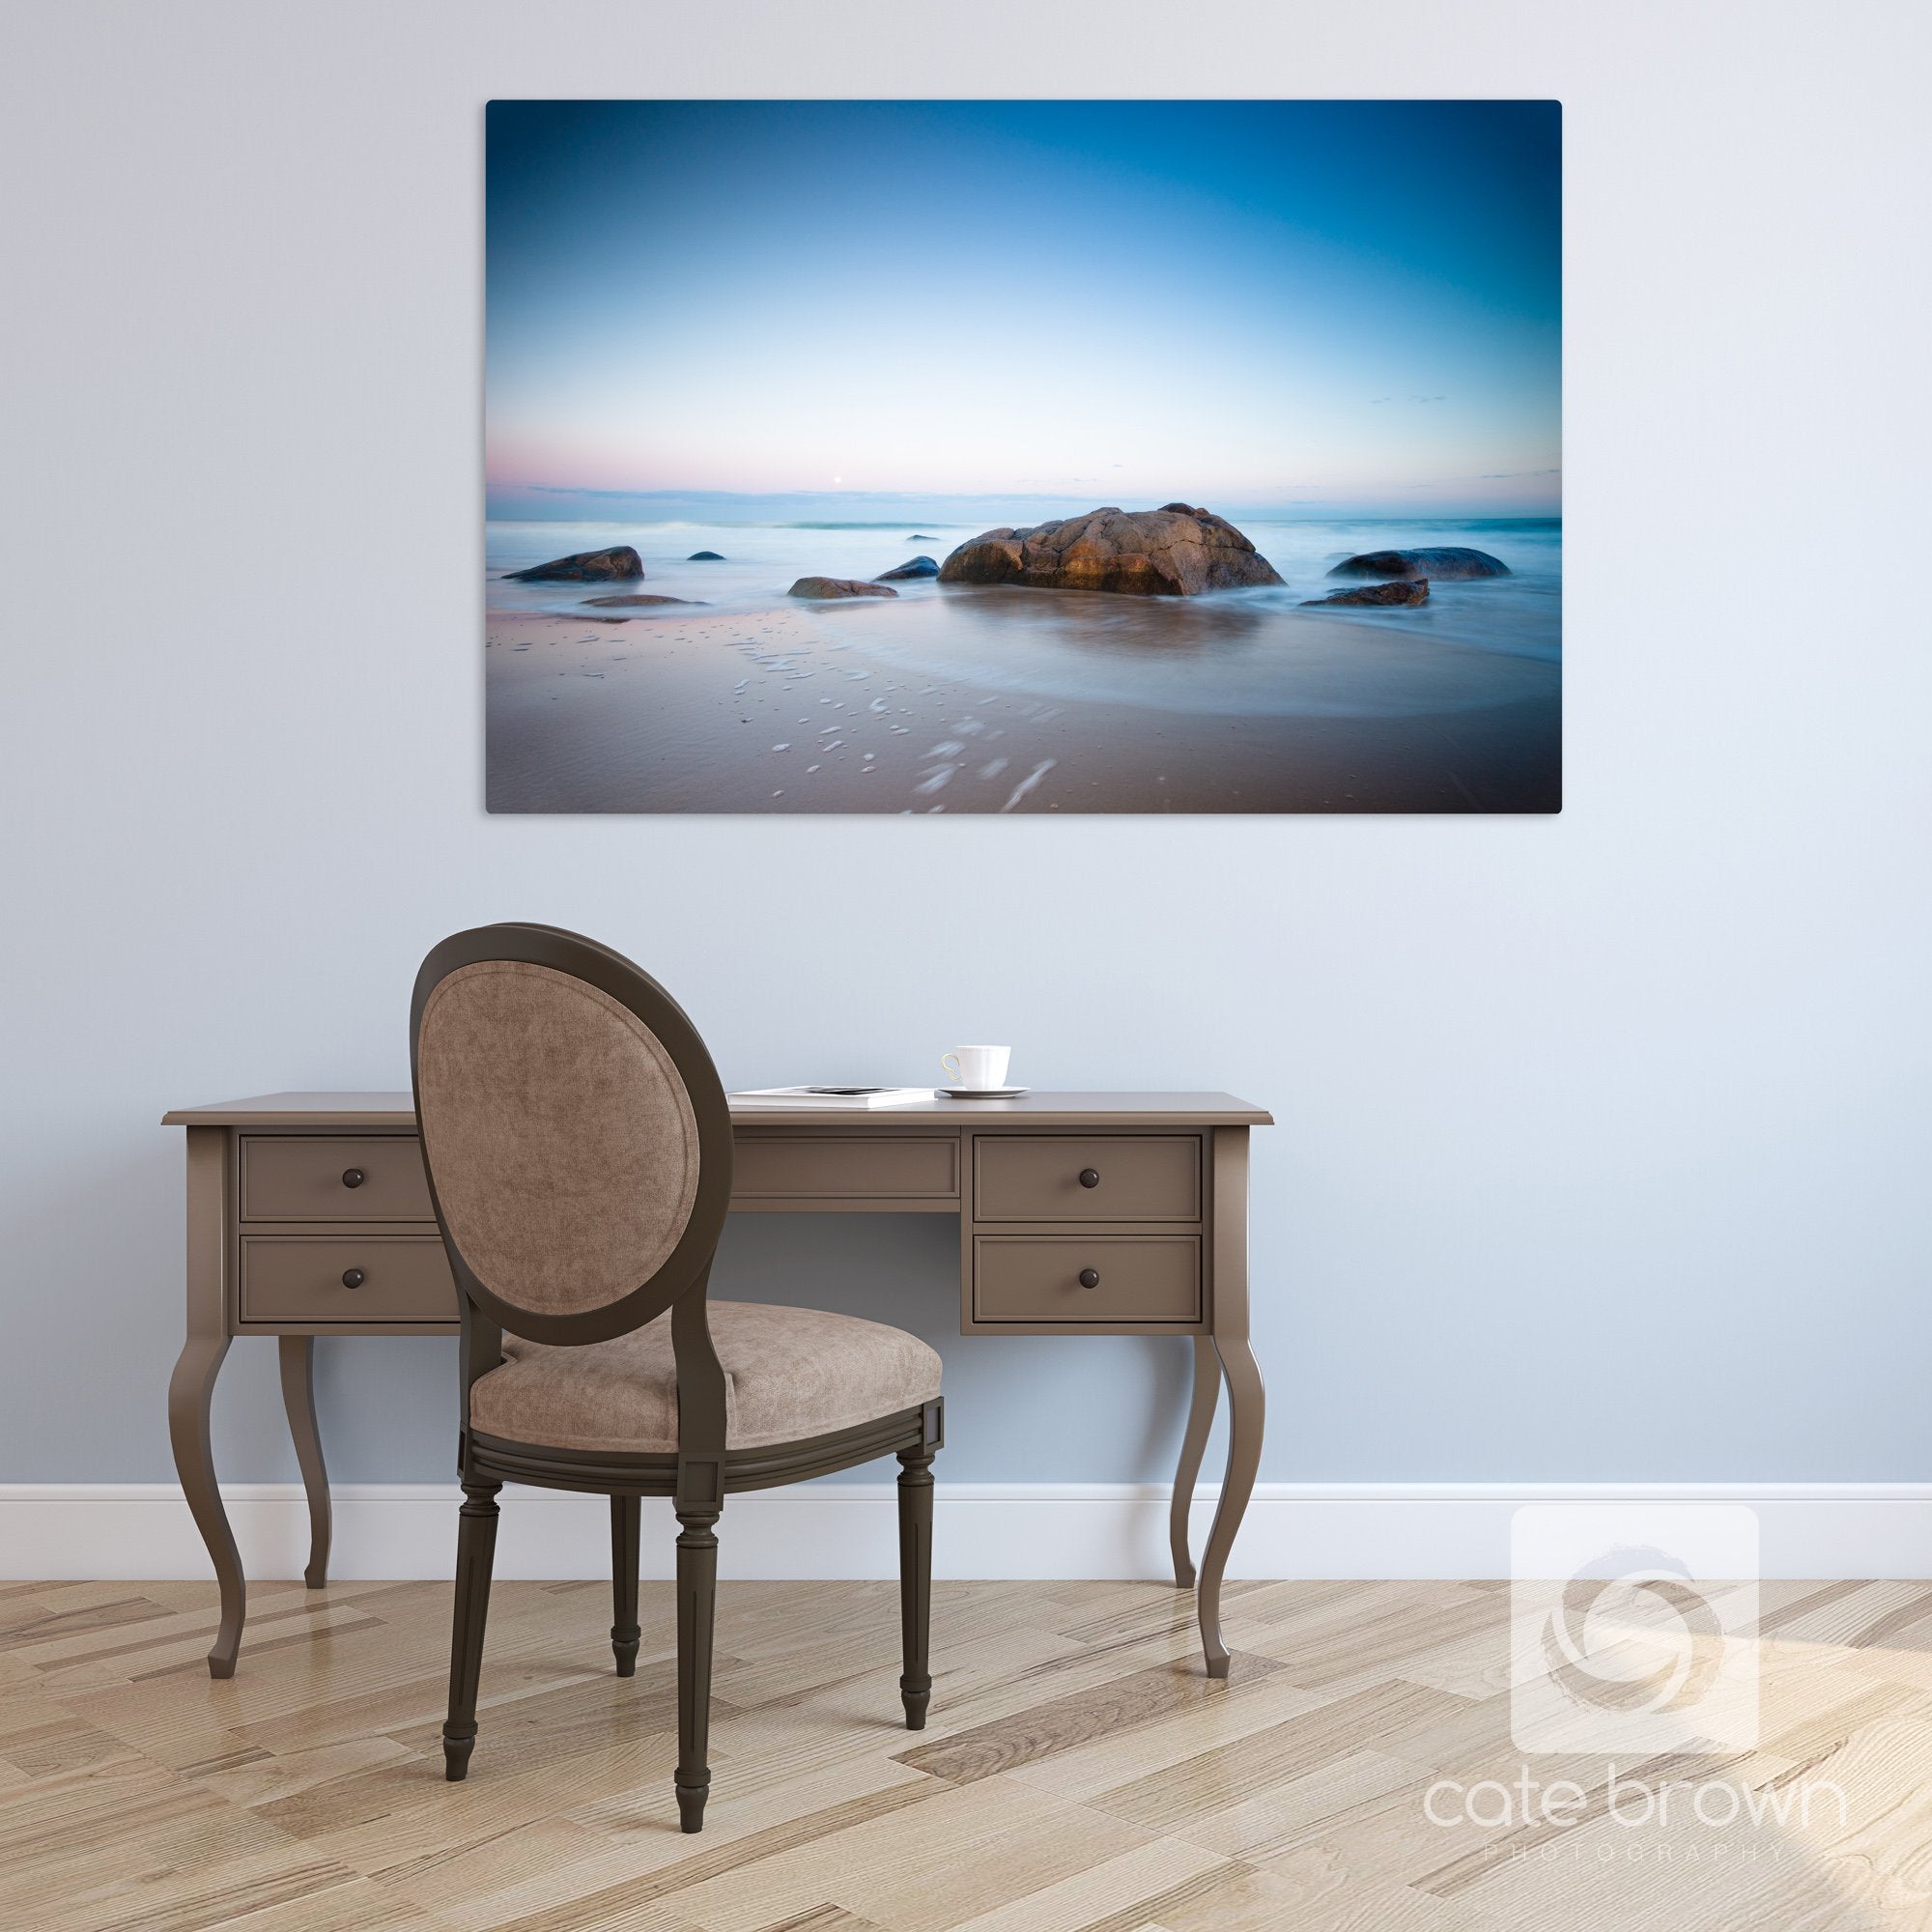 Cate Brown Photo Moonrise at Qeba  //  Seascape Photography Made to Order Ocean Fine Art